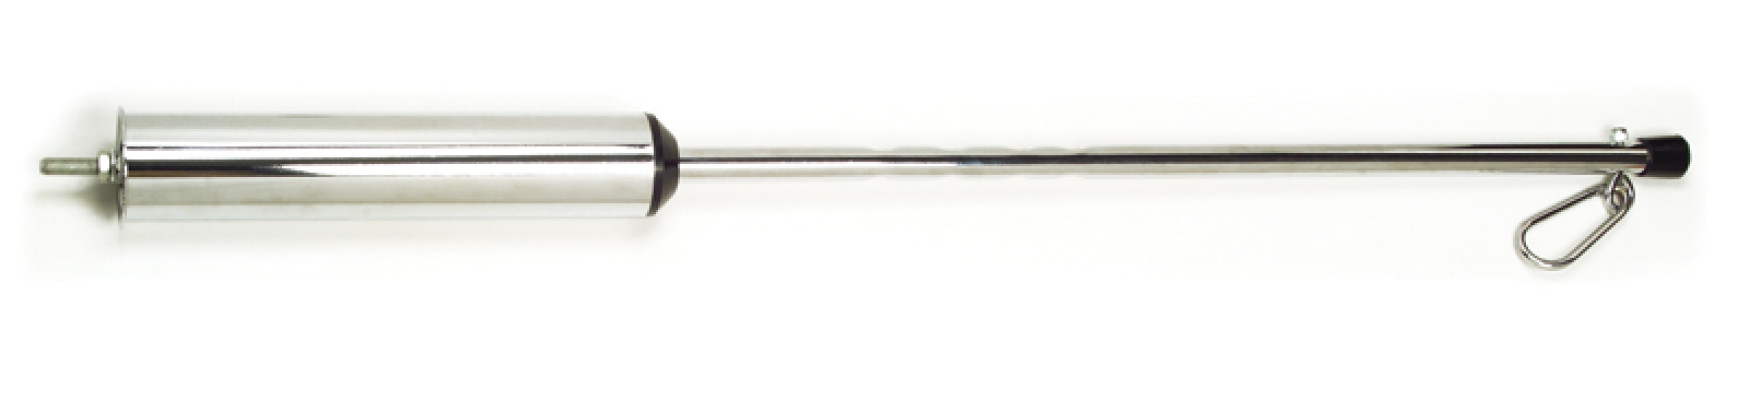 Image of Pogo Stick, Chrome, 40" from Grote. Part number: 81-0130